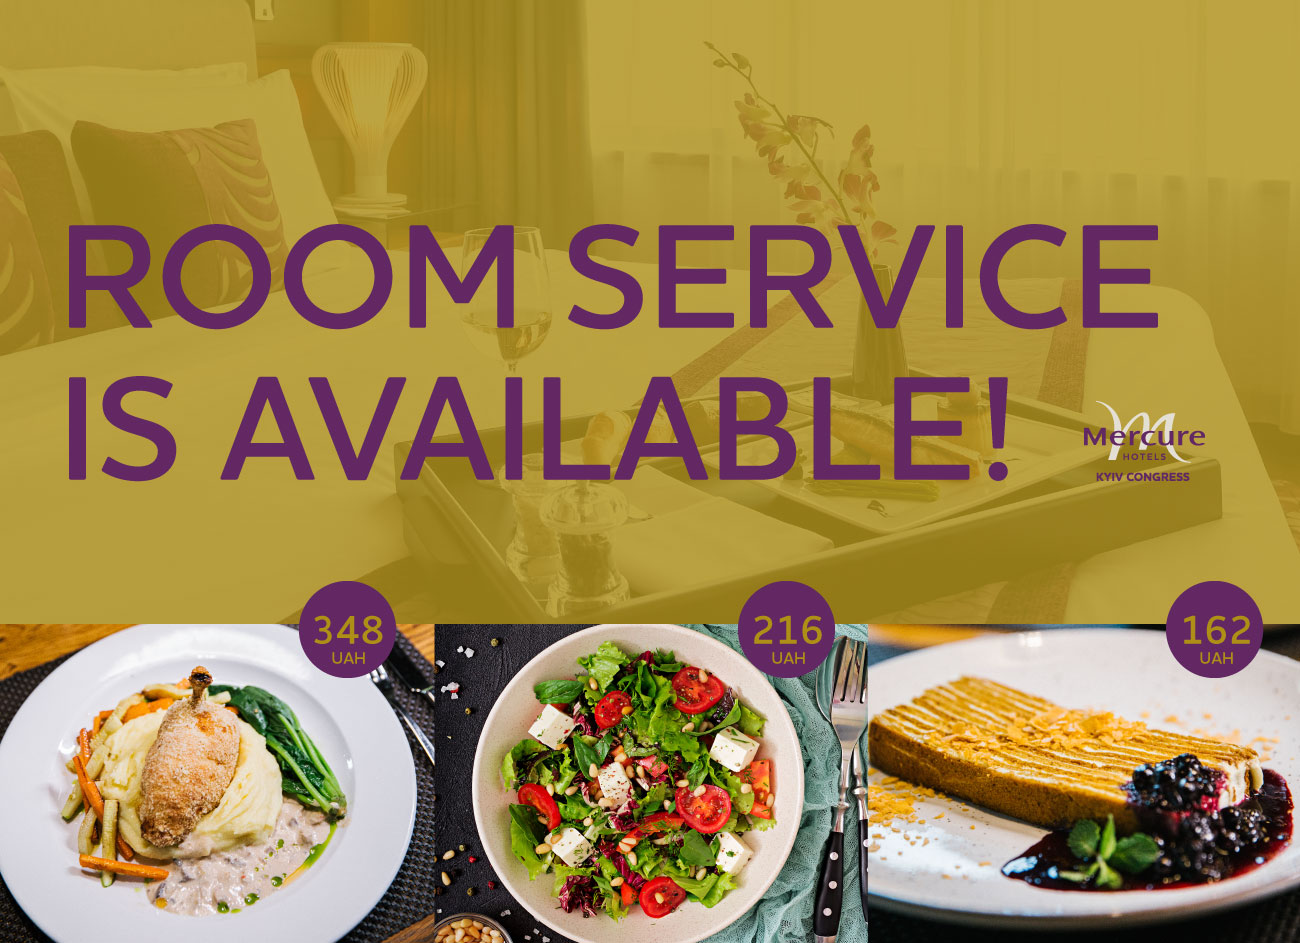 Room service is available again!